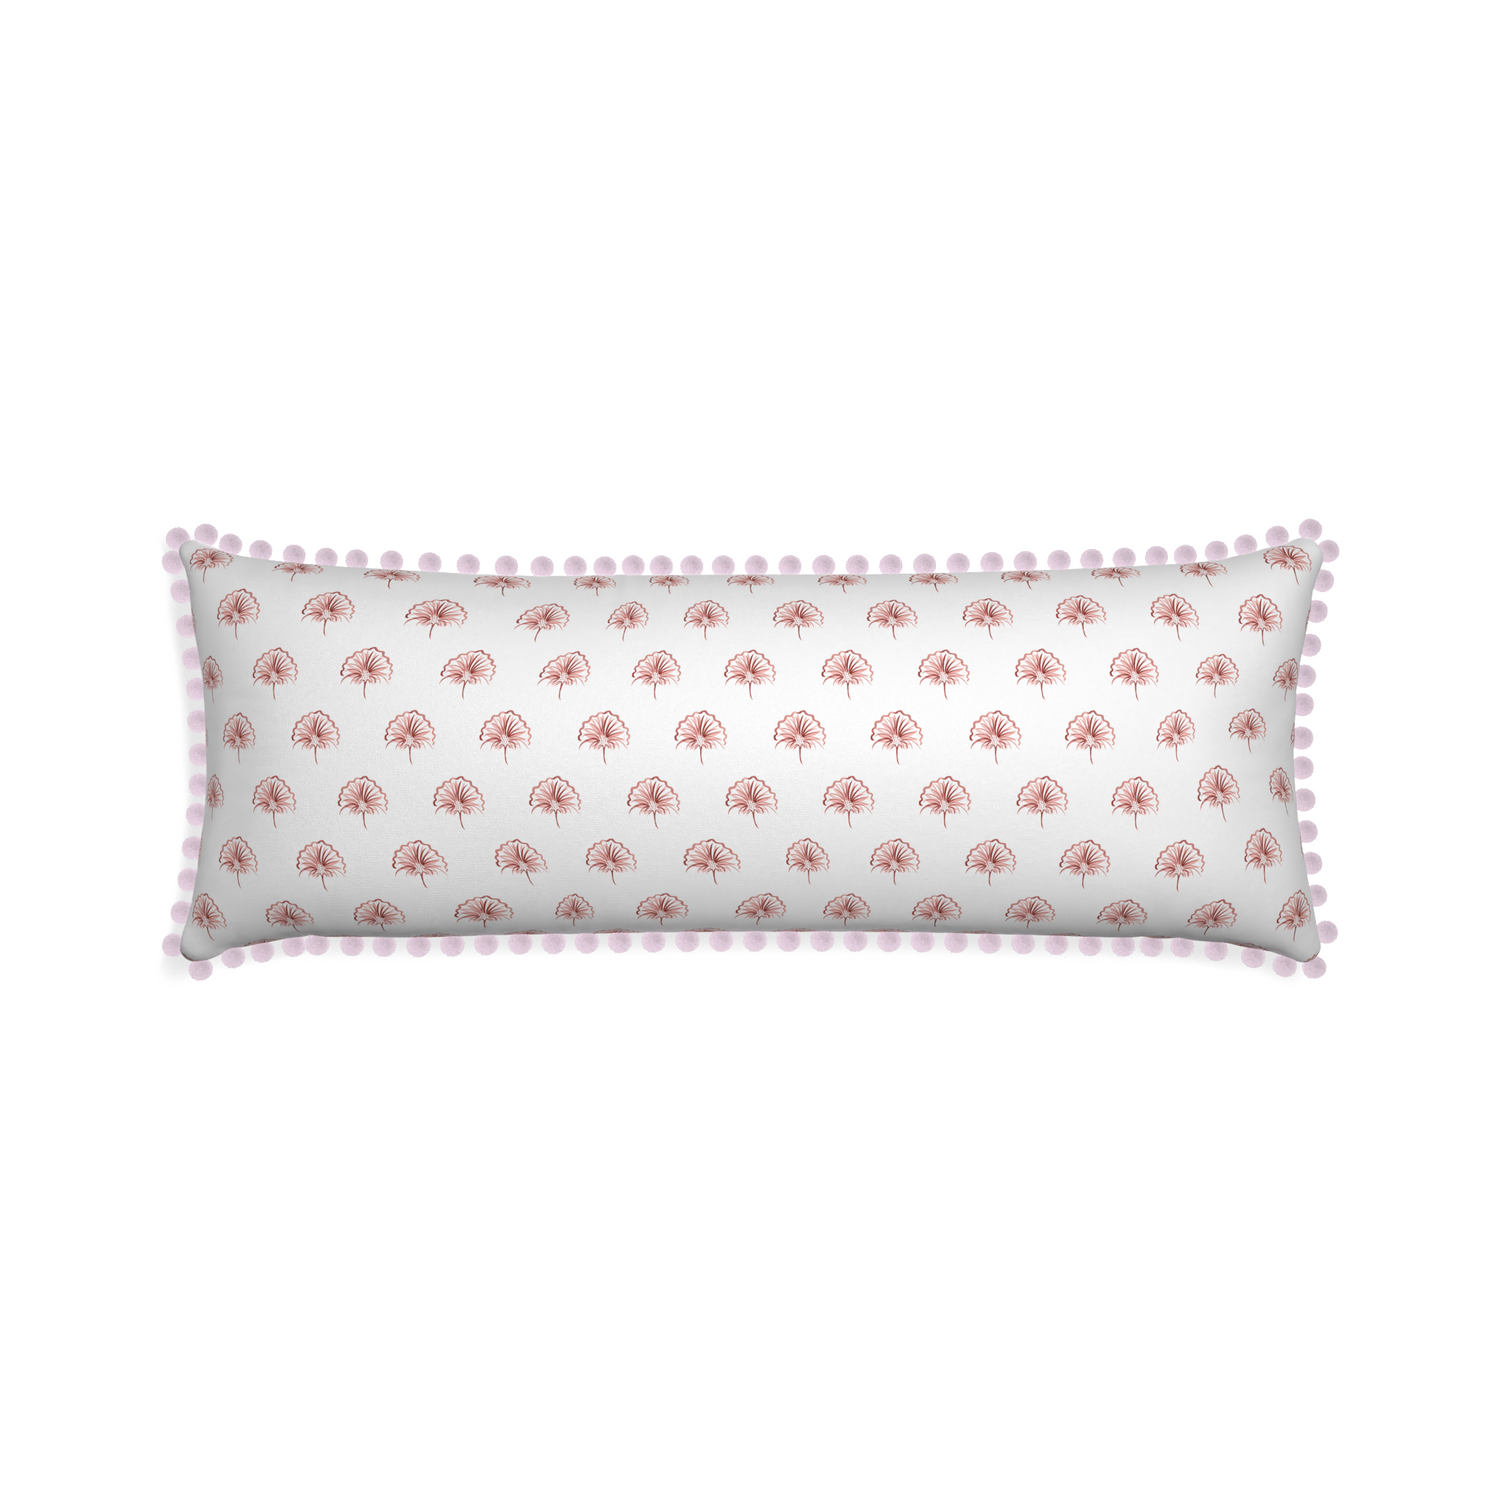 Xl-lumbar penelope rose custom floral pinkpillow with l on white background